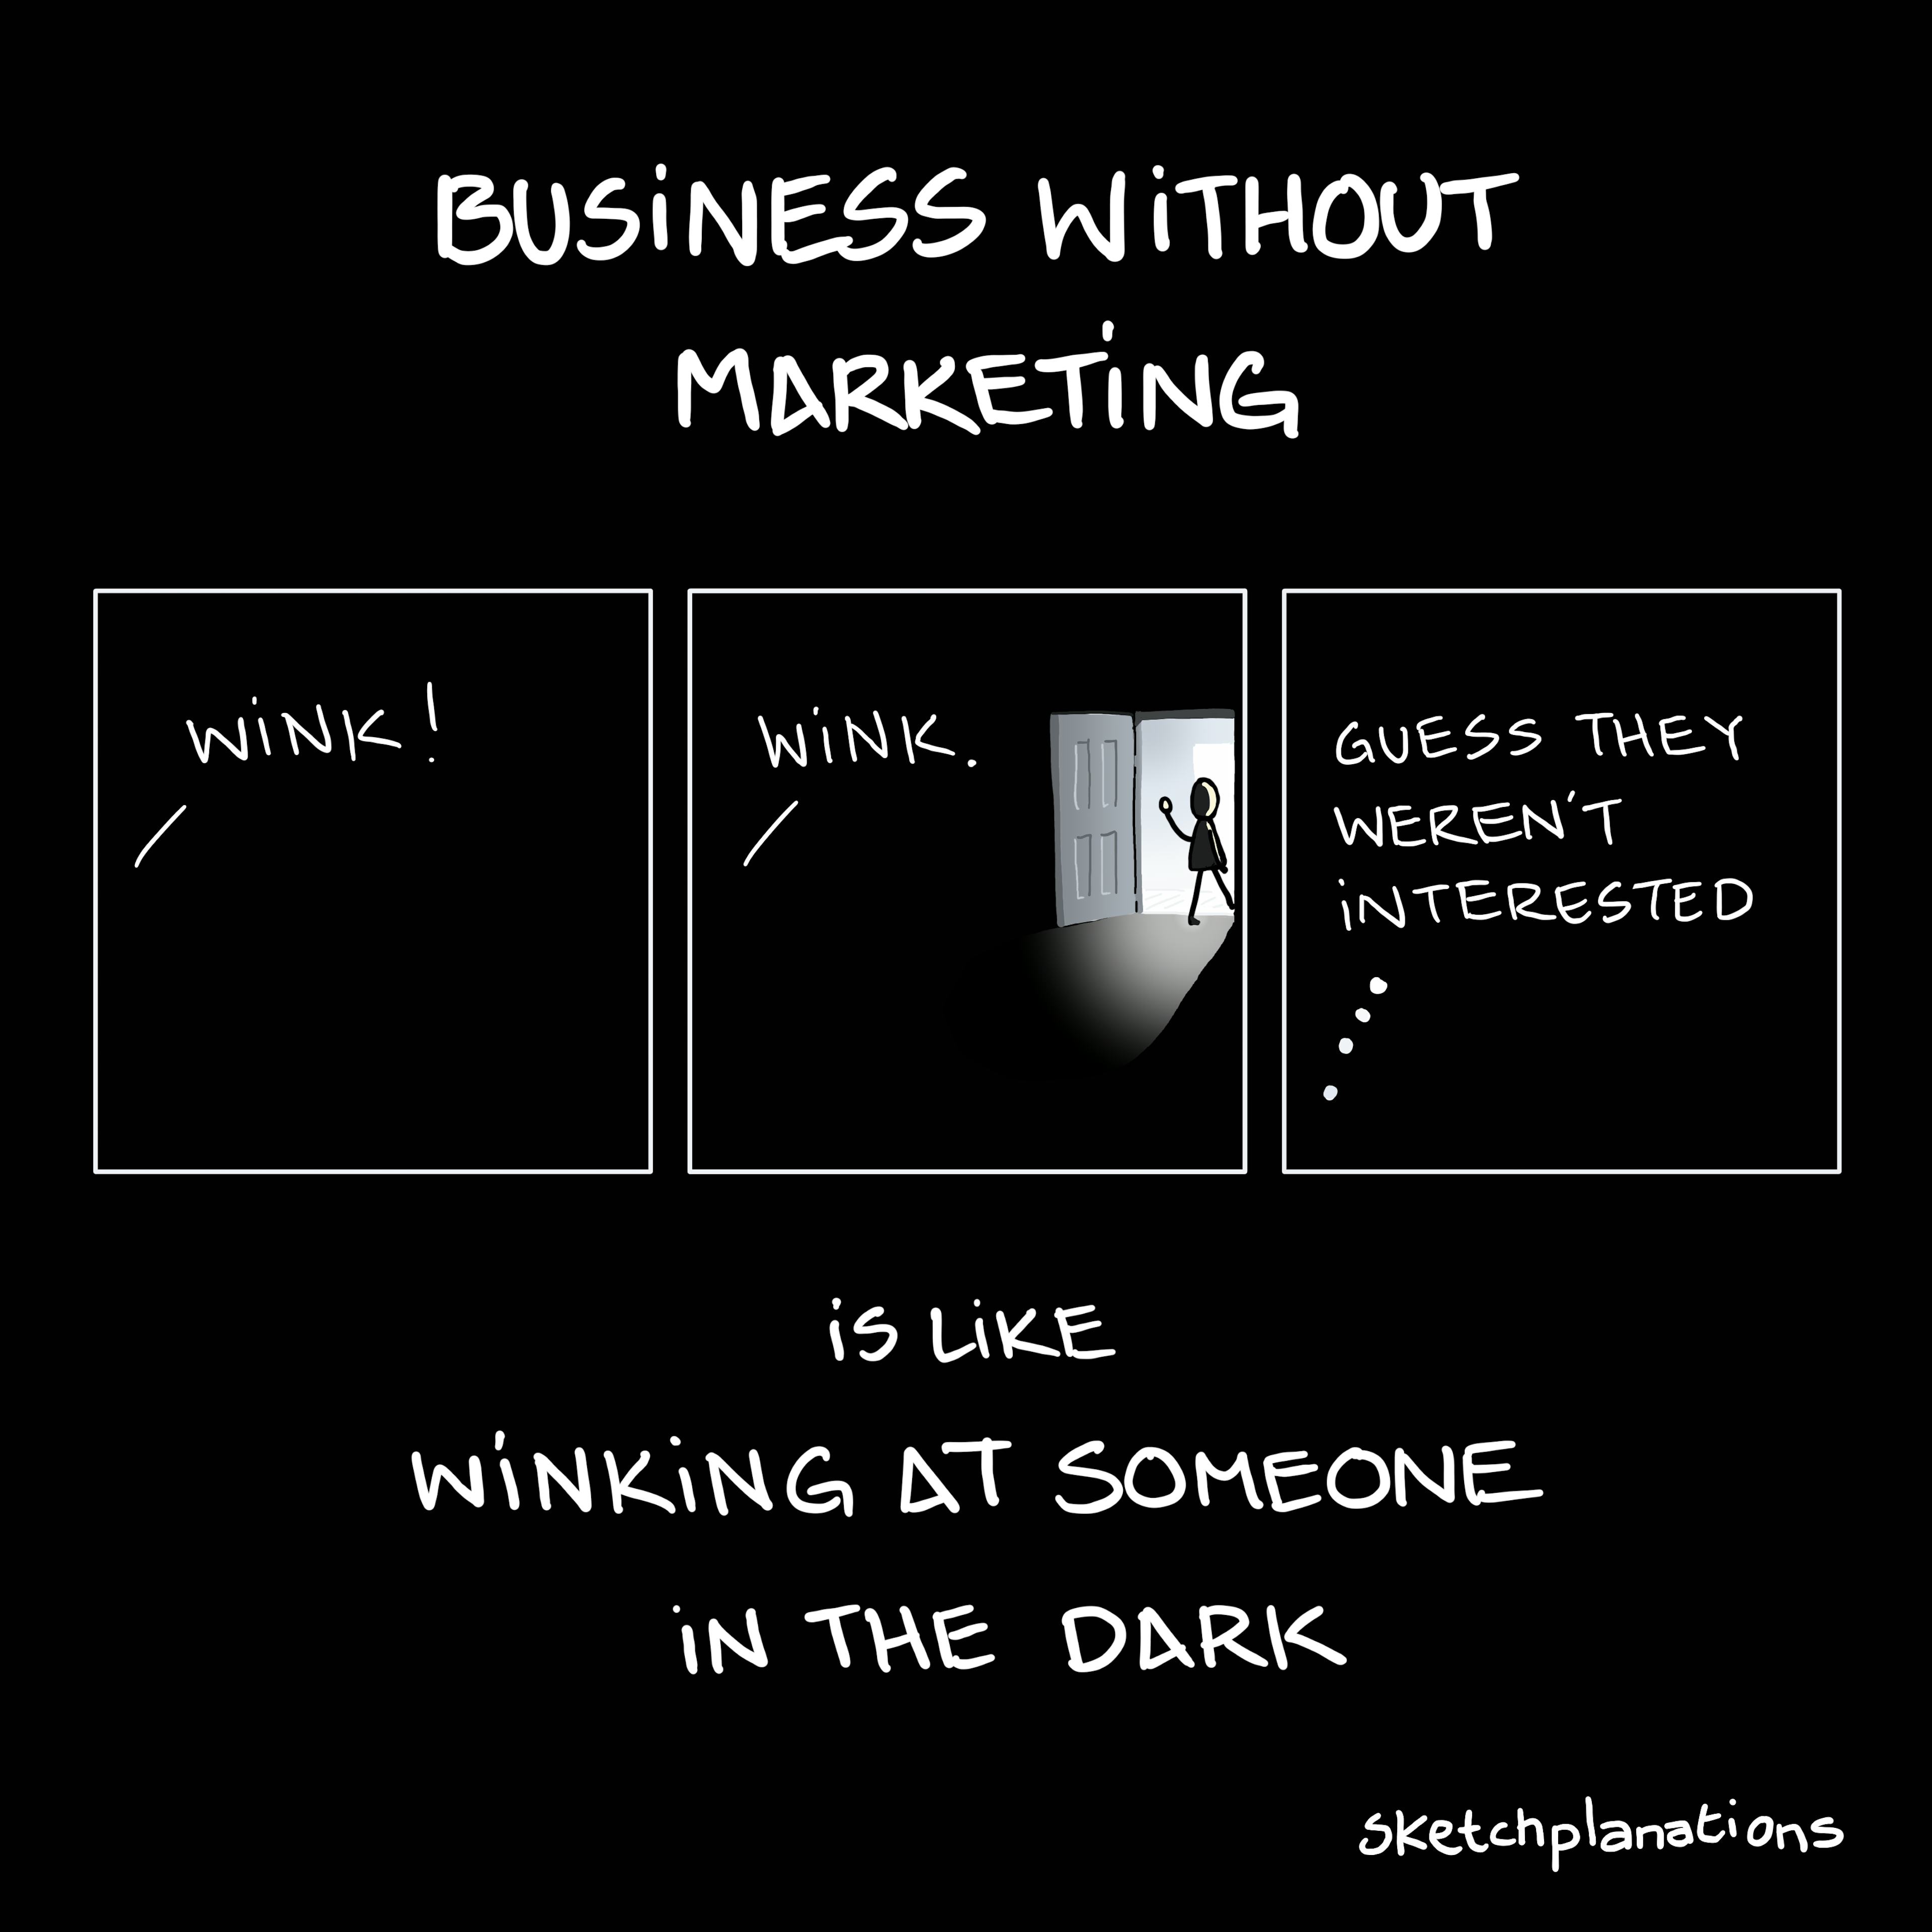 Business without marketing is like winking at someone in the dark illustration: with three panels including someone winking in the dark, someone leaving, and then concluding that they weren't interested (from the Steuart Henderson Britt quote)